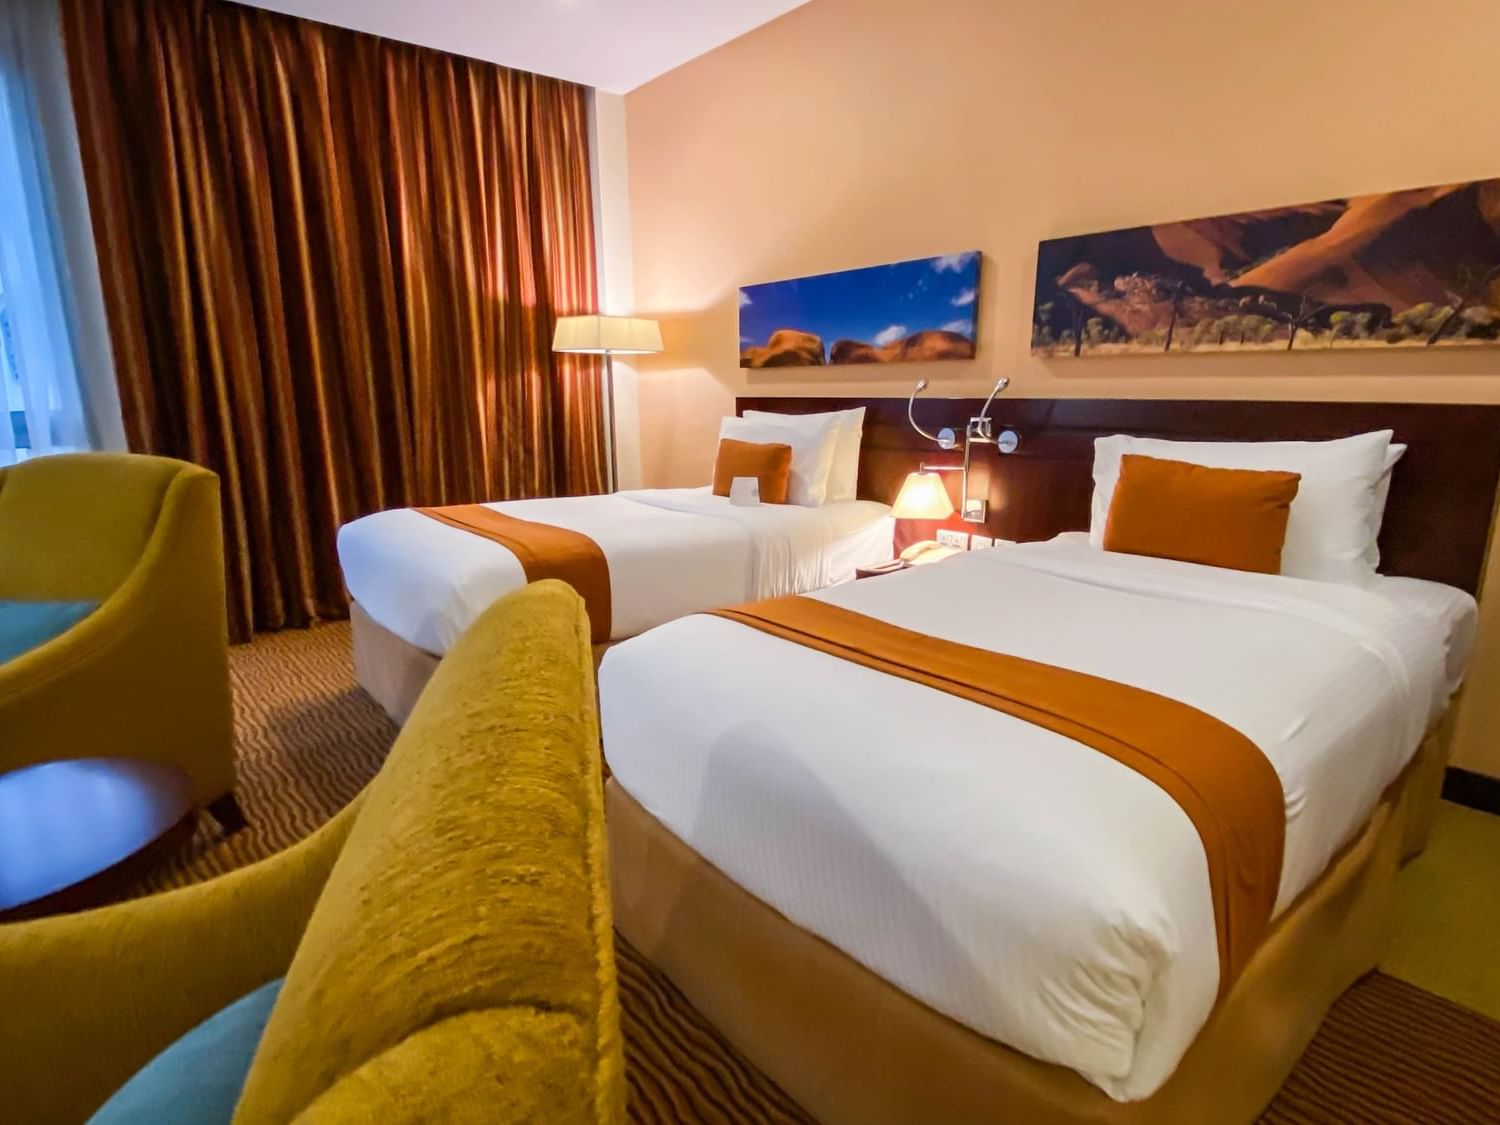 2 Beds & lounge area in Deluxe Room at City Seasons Hotels